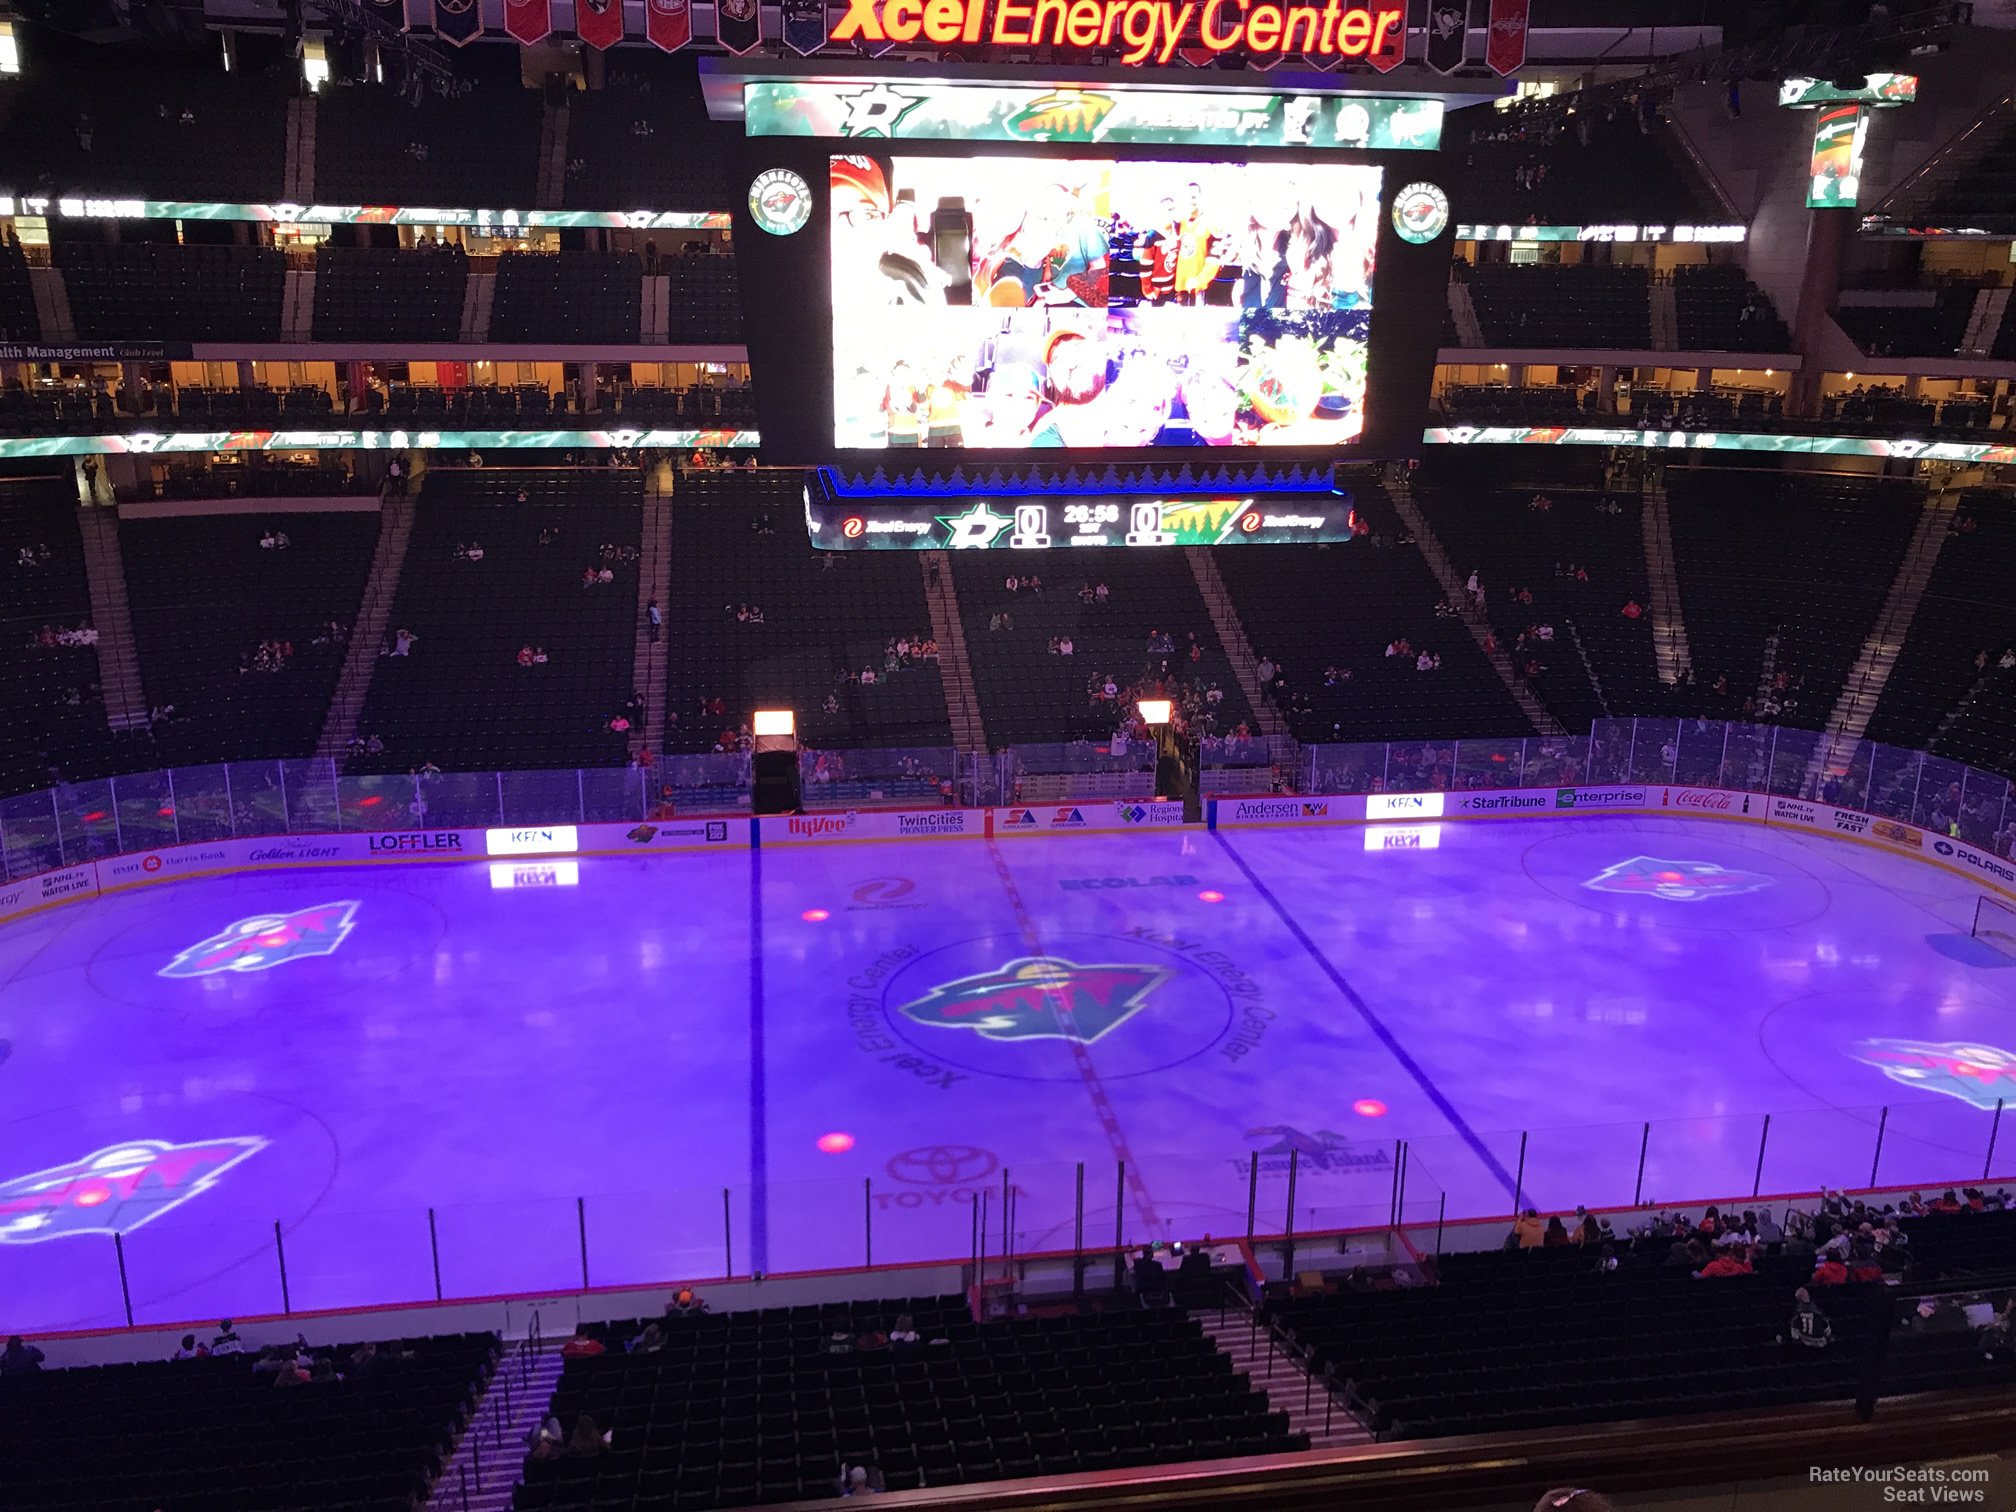 section c7, row 5 seat view  for hockey - xcel energy center